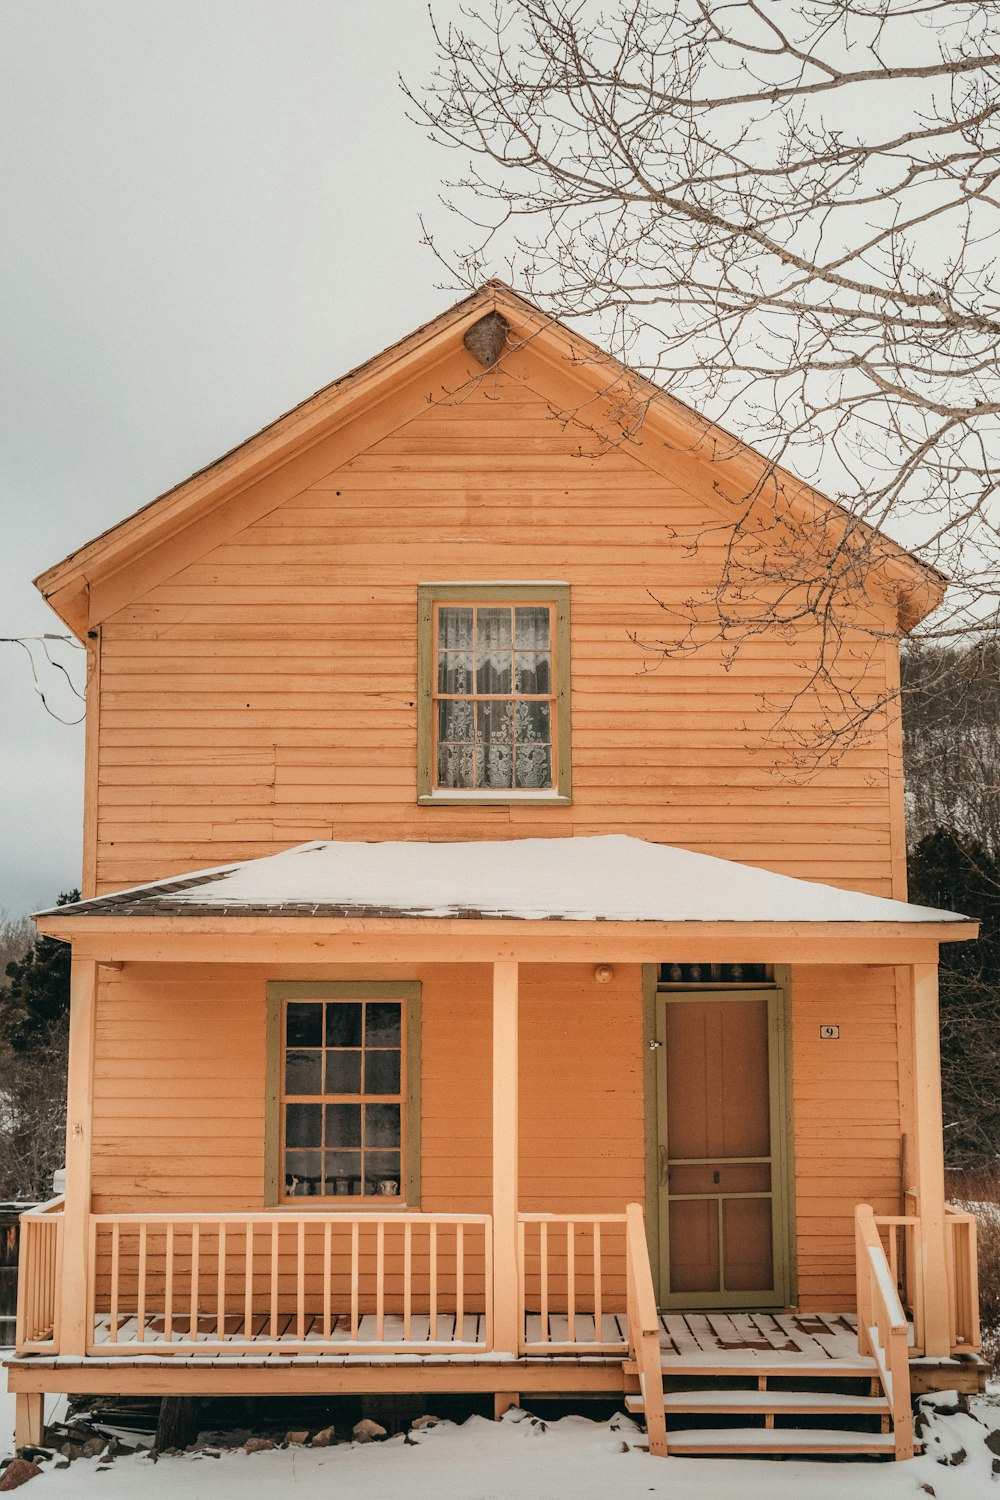 a yellow house with a porch and snow on the ground